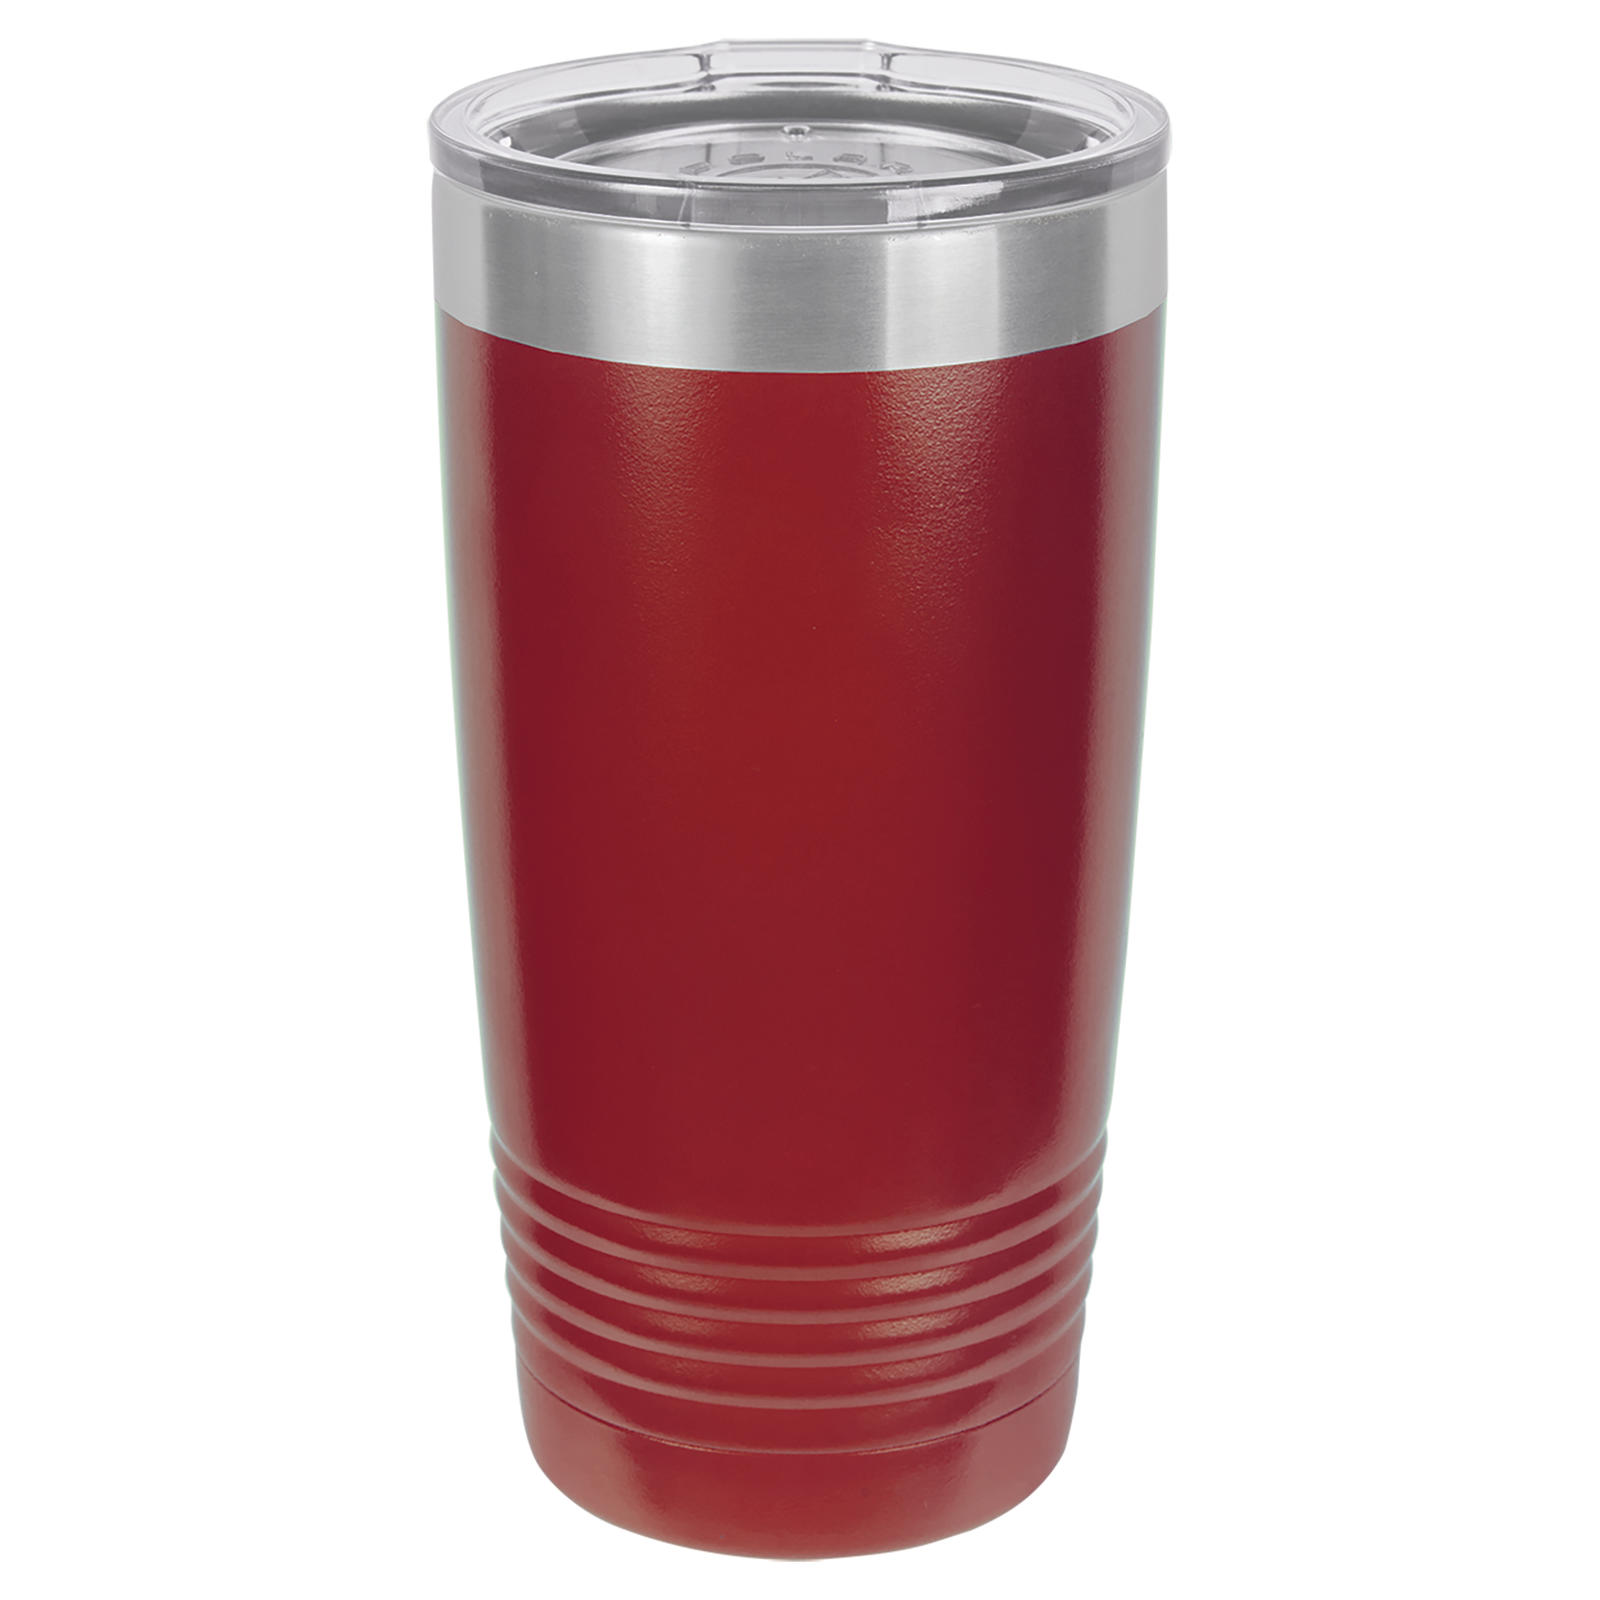 Of Course SIZE MATTERS No one wants a small DRINK! - Powder Coated Etched  Tumbler